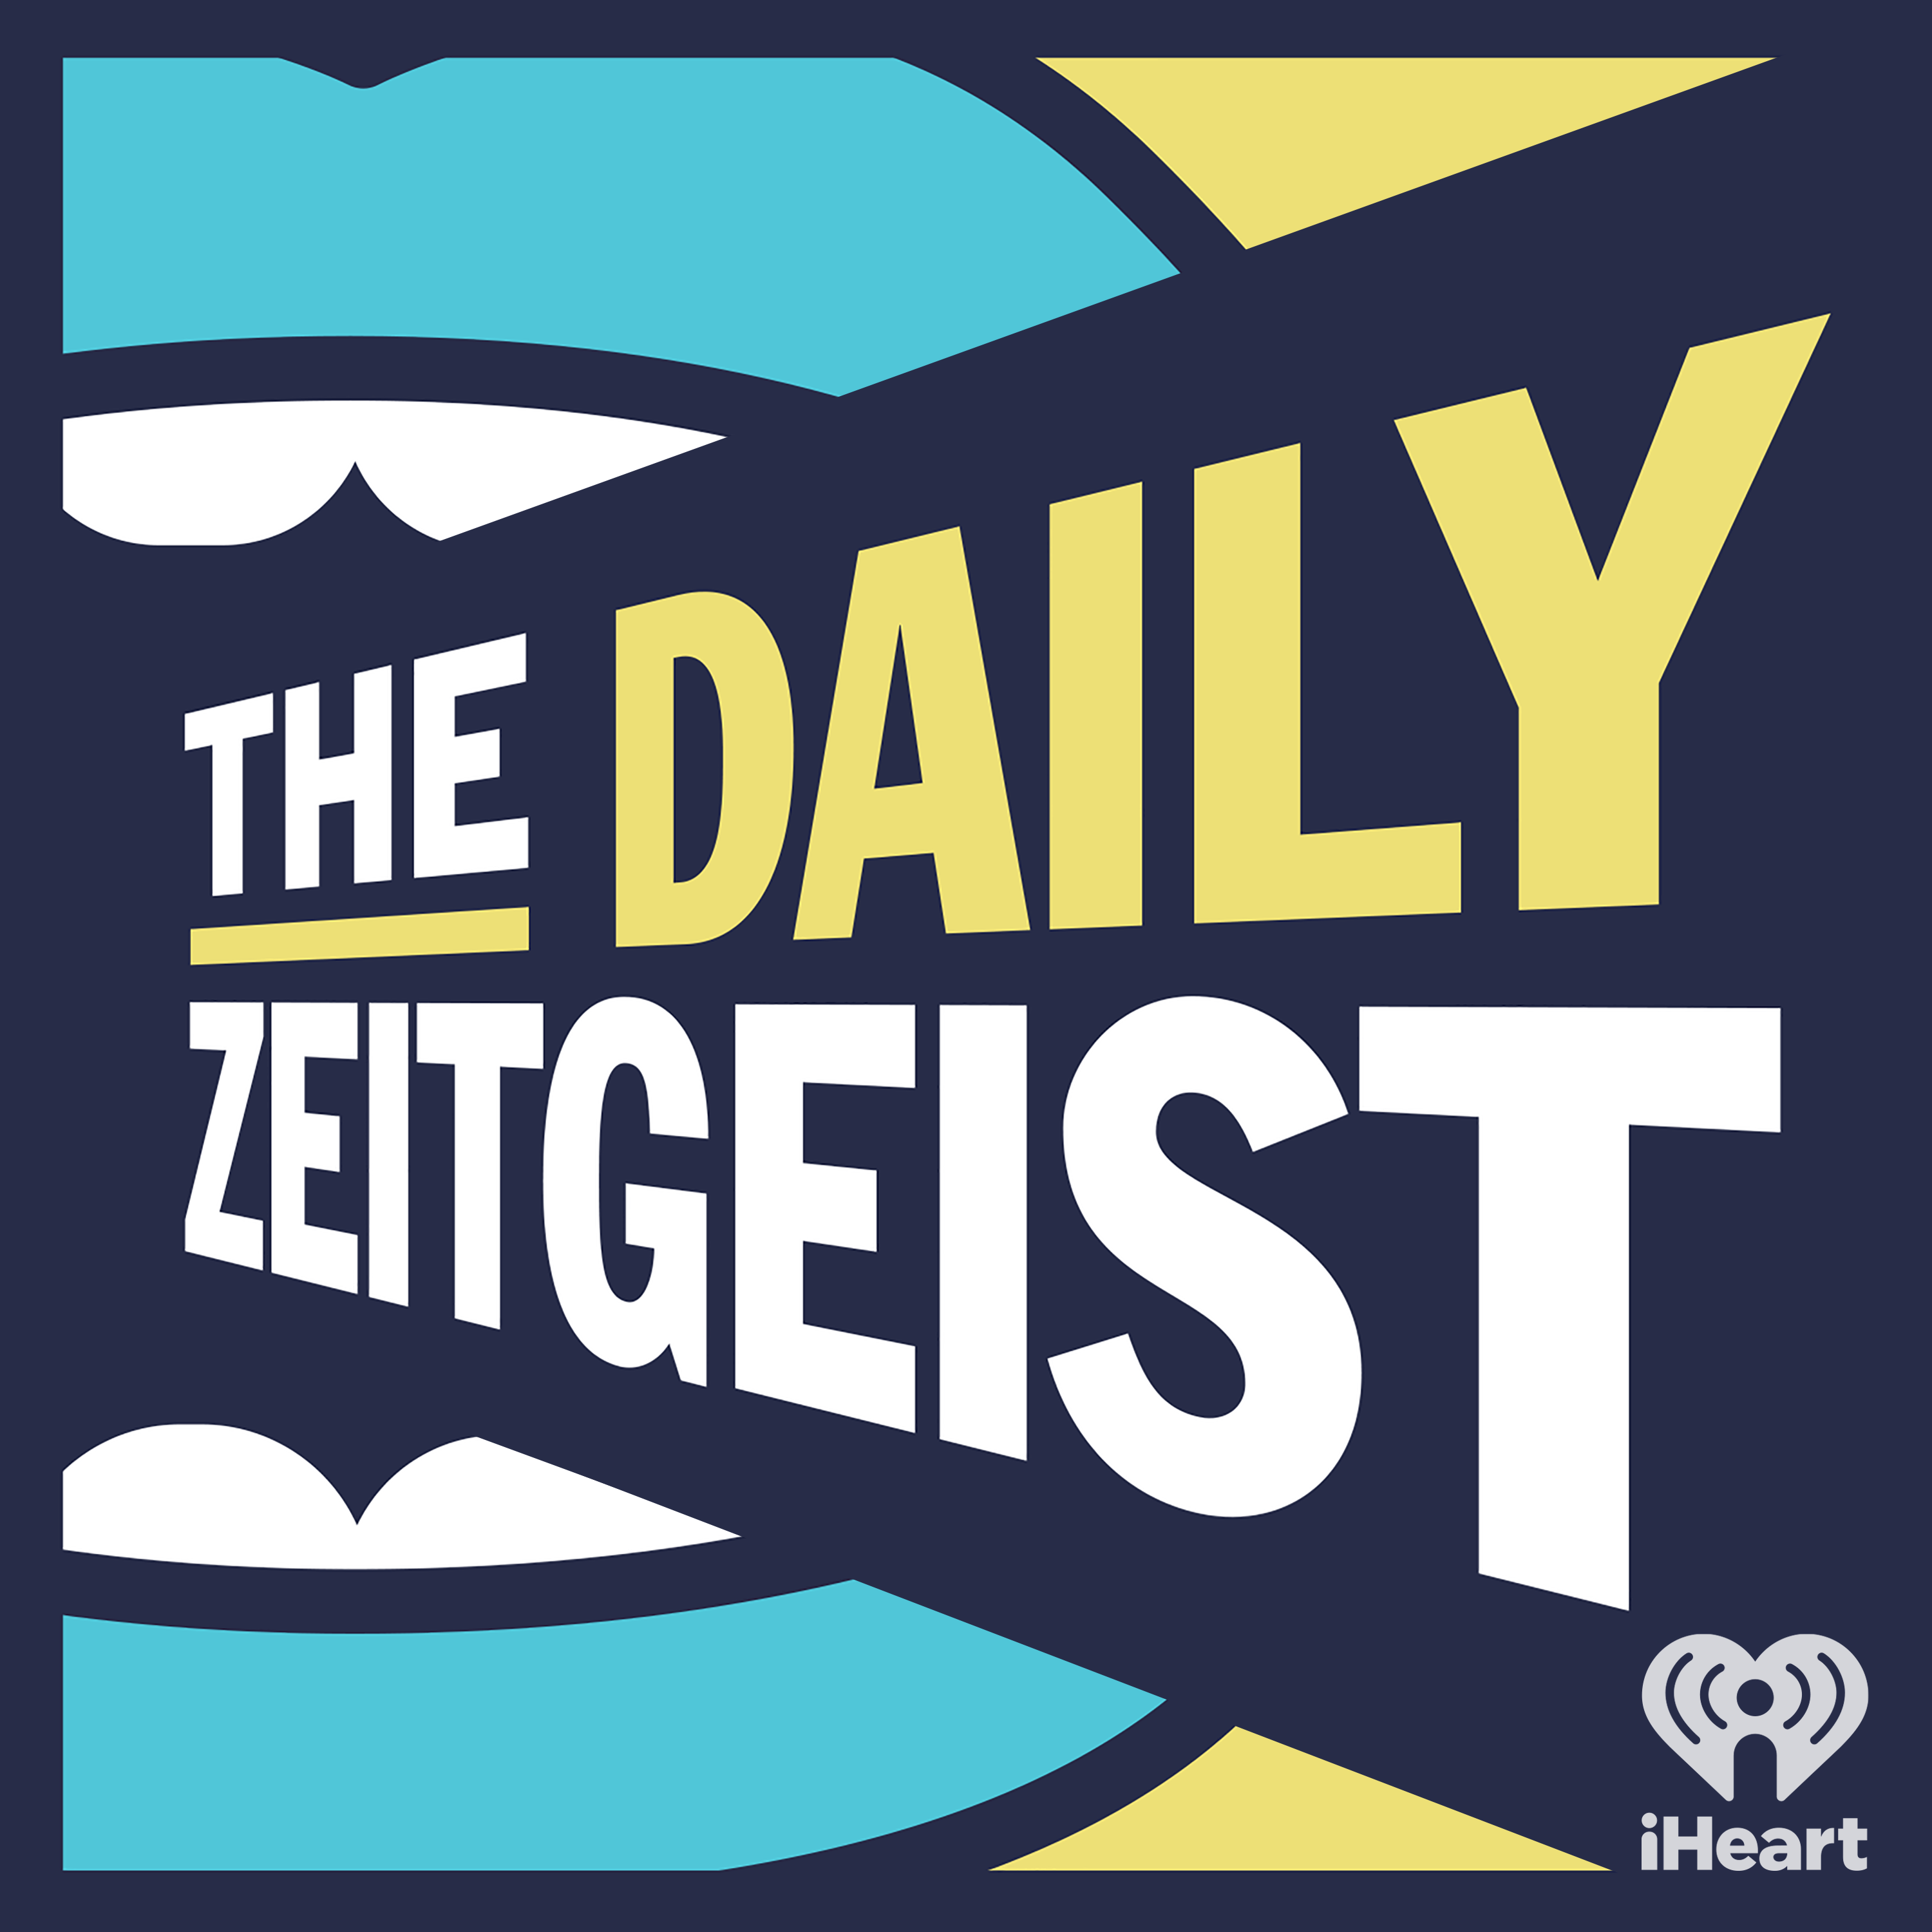 Zeit About Now, The Funk Soul Trender 11/3: Election Results, Atlanta Braves, Vice News, CVS, Alec Baldwin, Aaron Rodgers